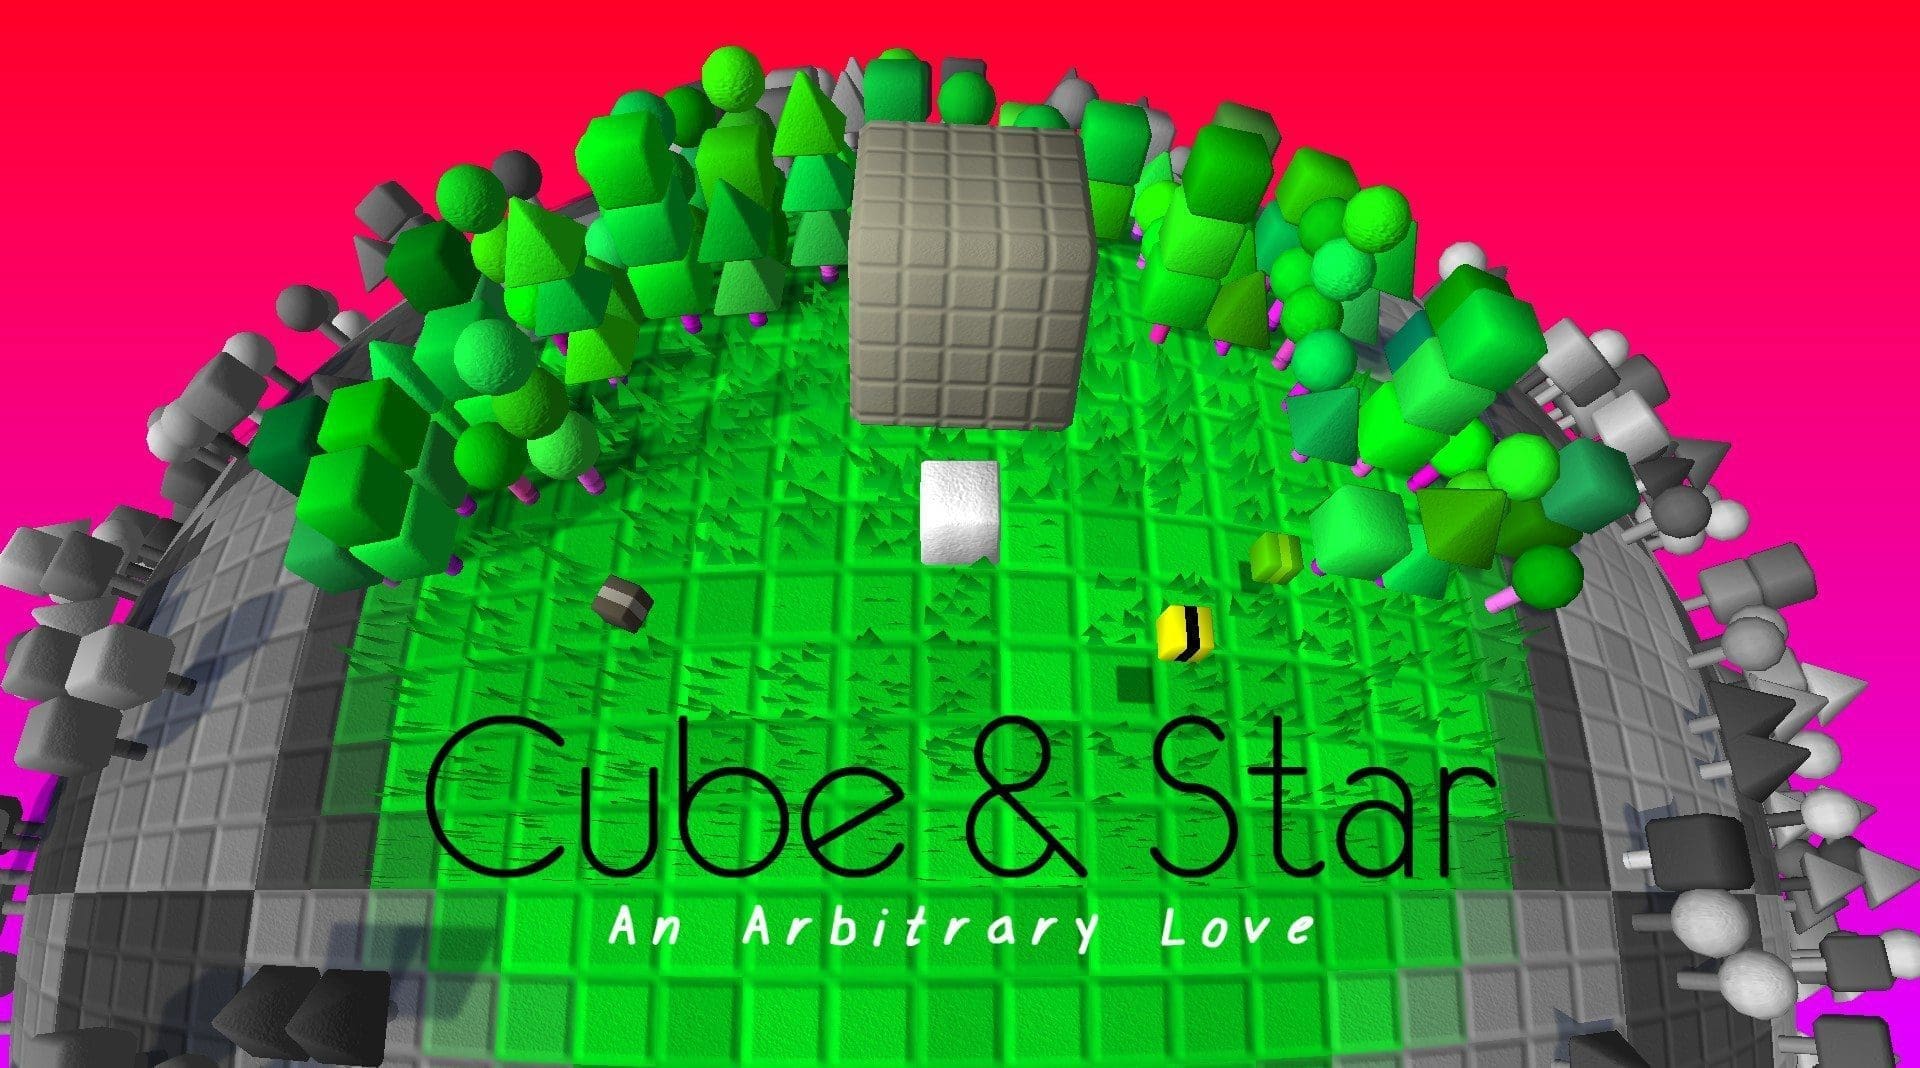 Cube & Star by Doppler Interactive